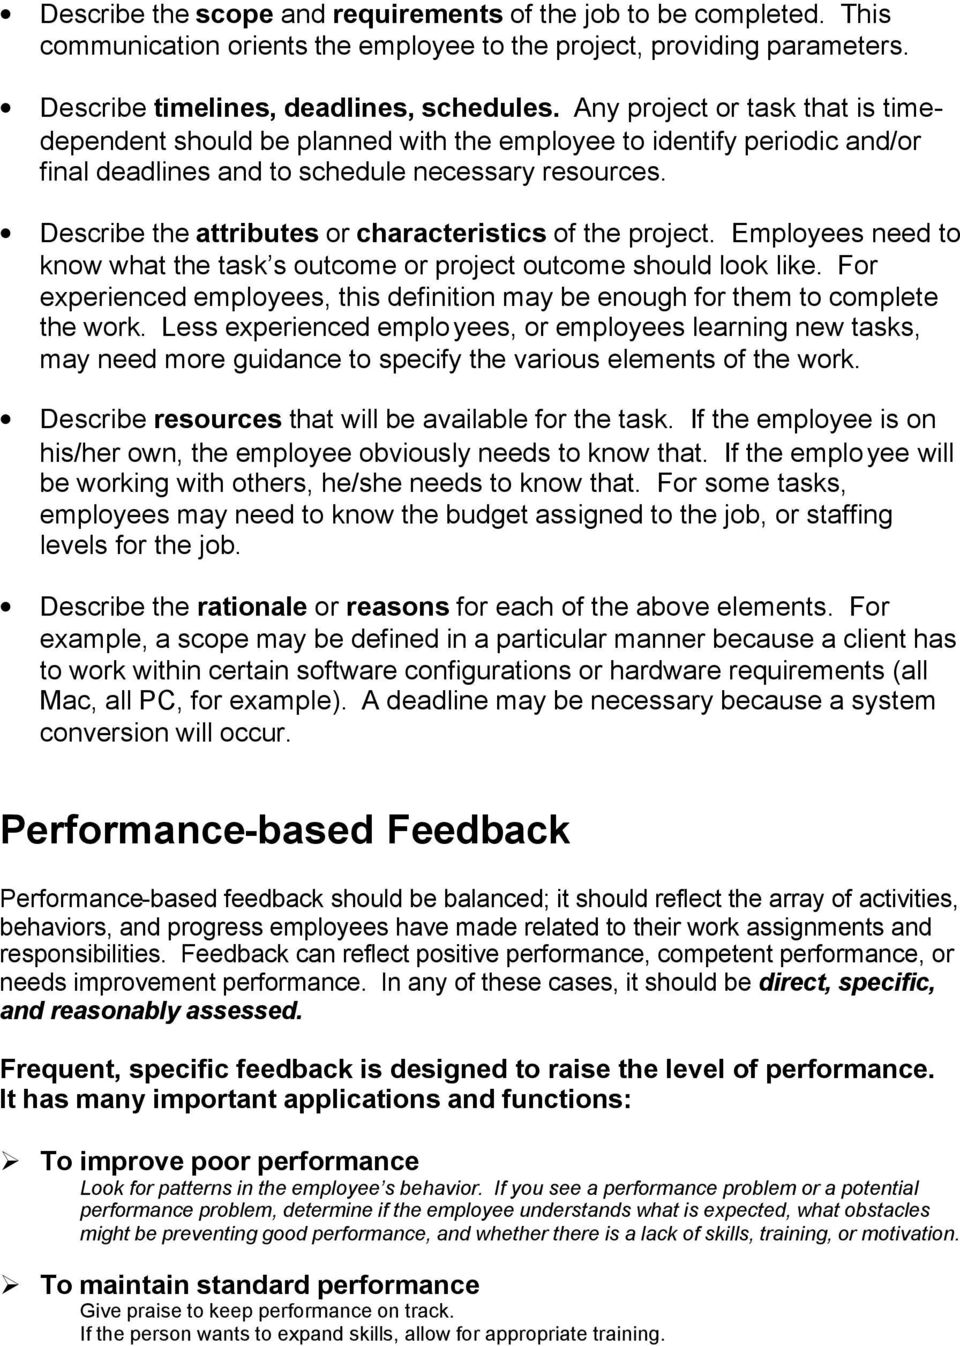 Describe the attributes or characteristics of the project. Employees need to know what the task s outcome or project outcome should look like.